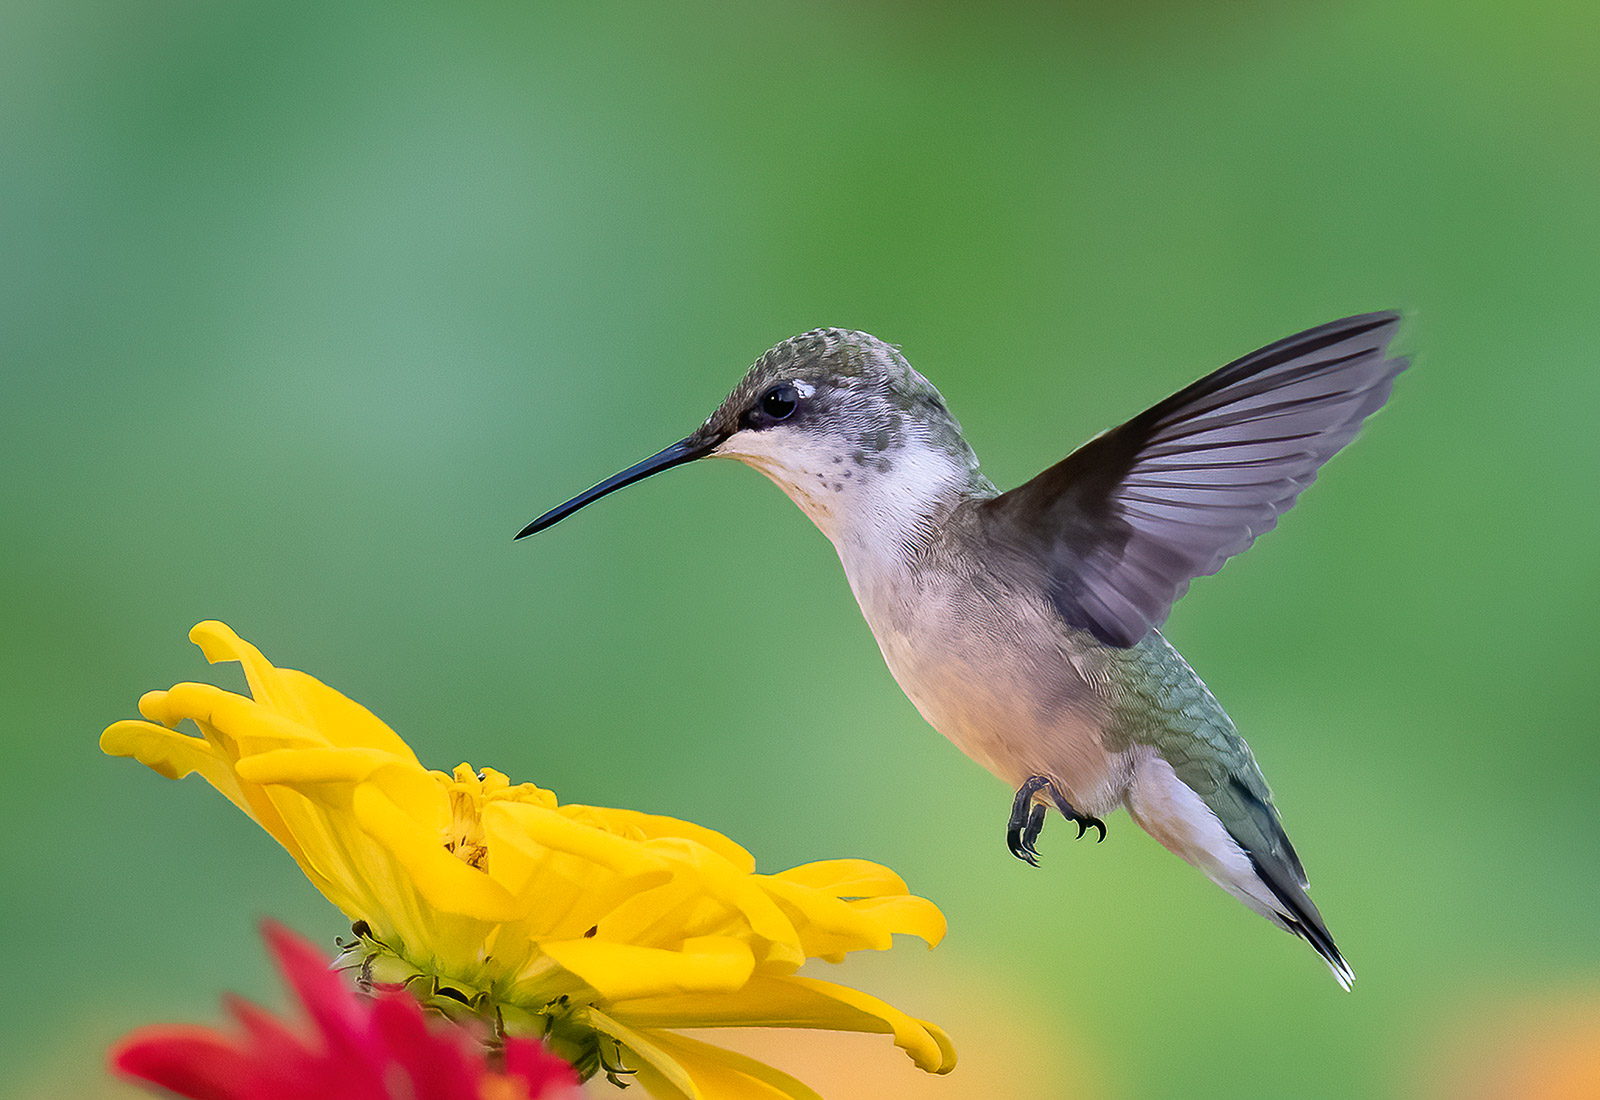 Ruby-throated Hummingbird hovers above a flower